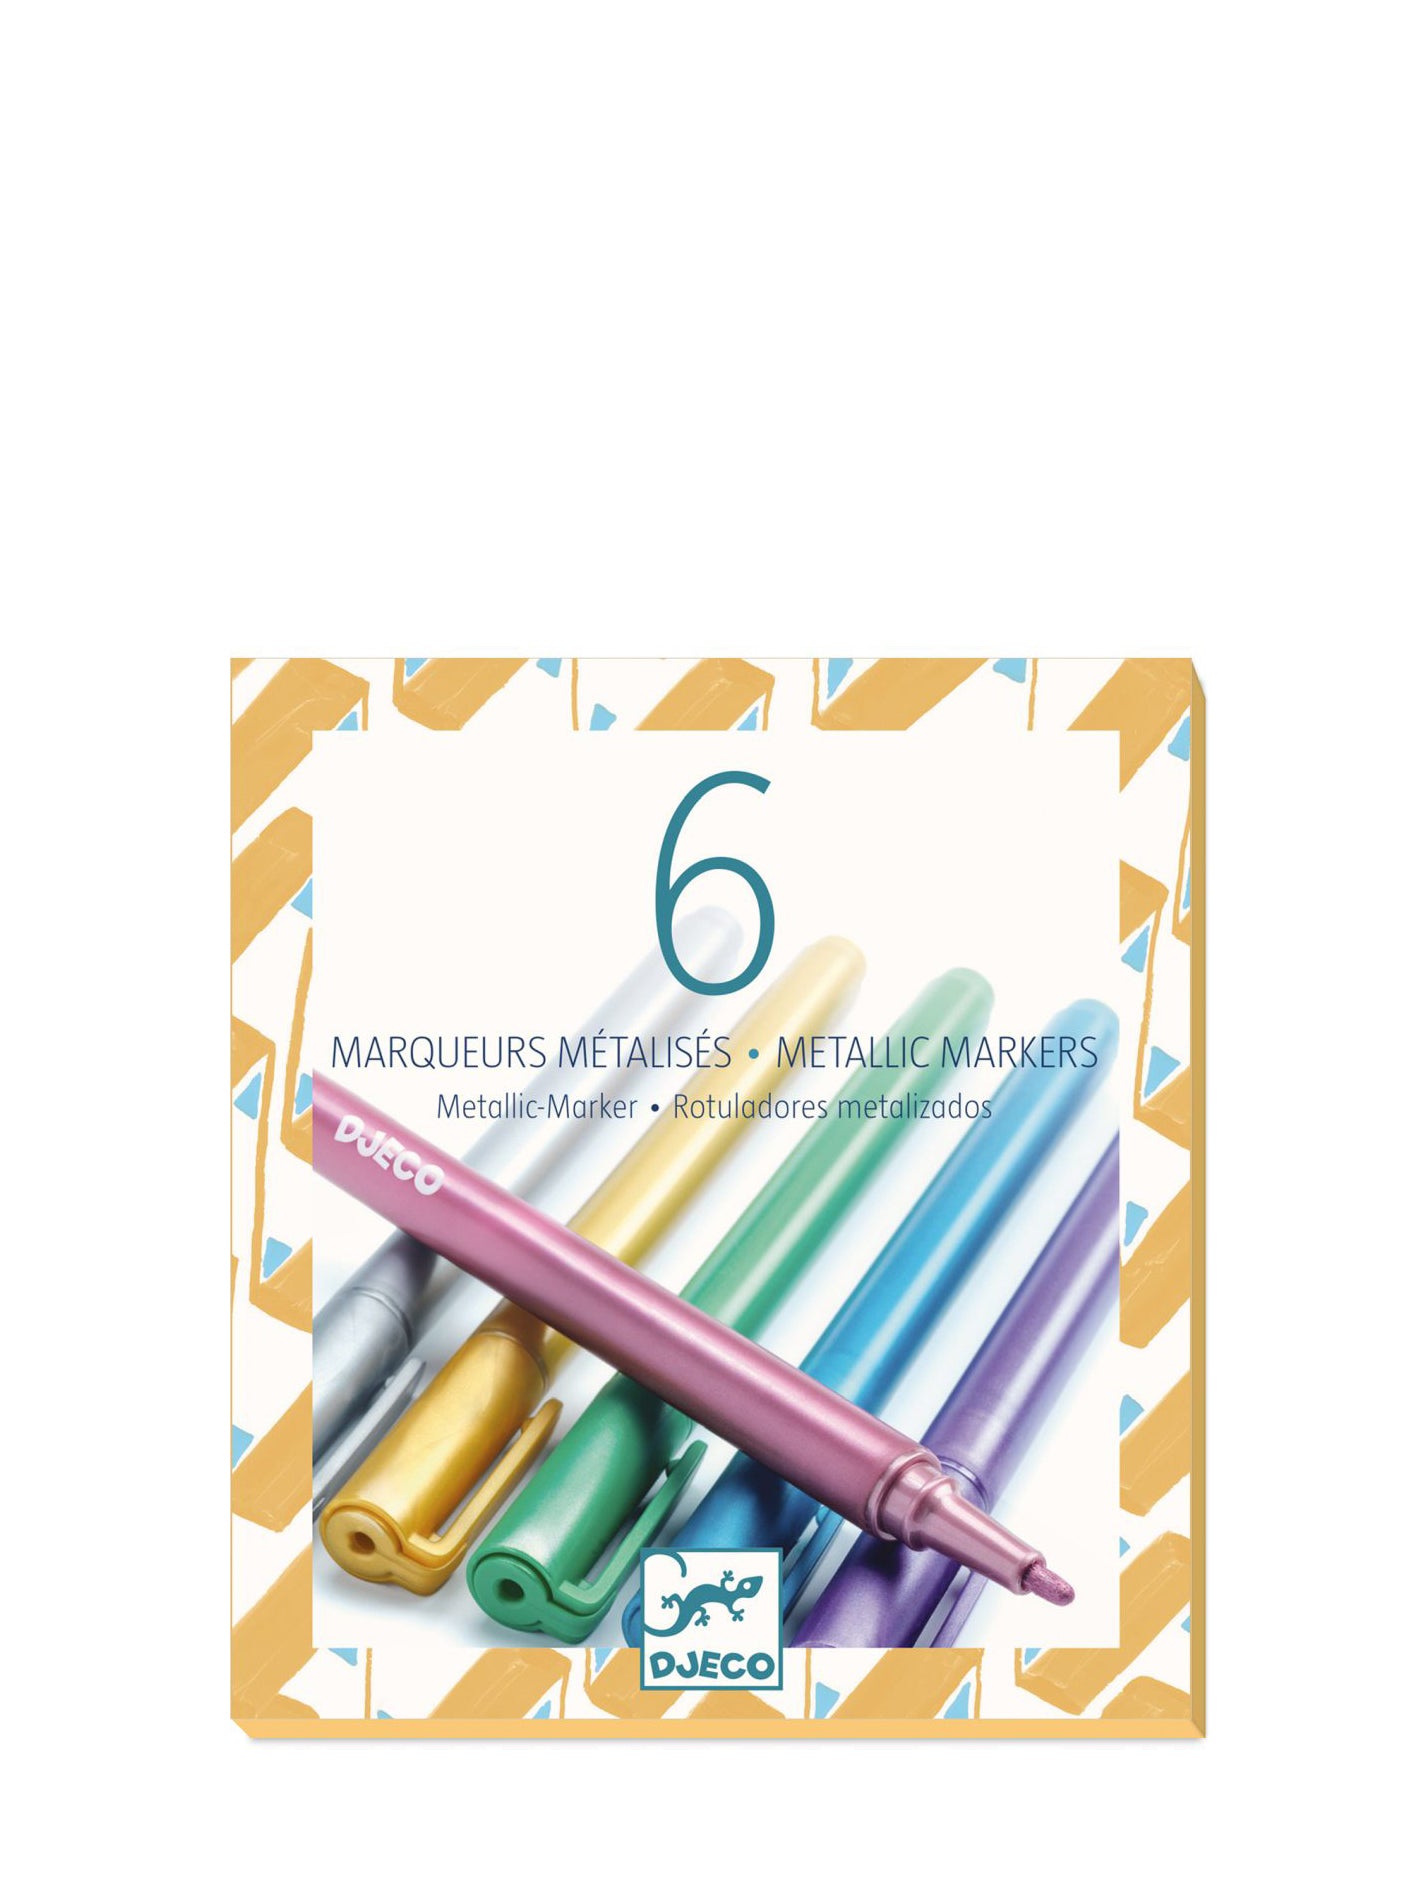 6 metallic markers: silver, gold, green, blue, purple and antique rose